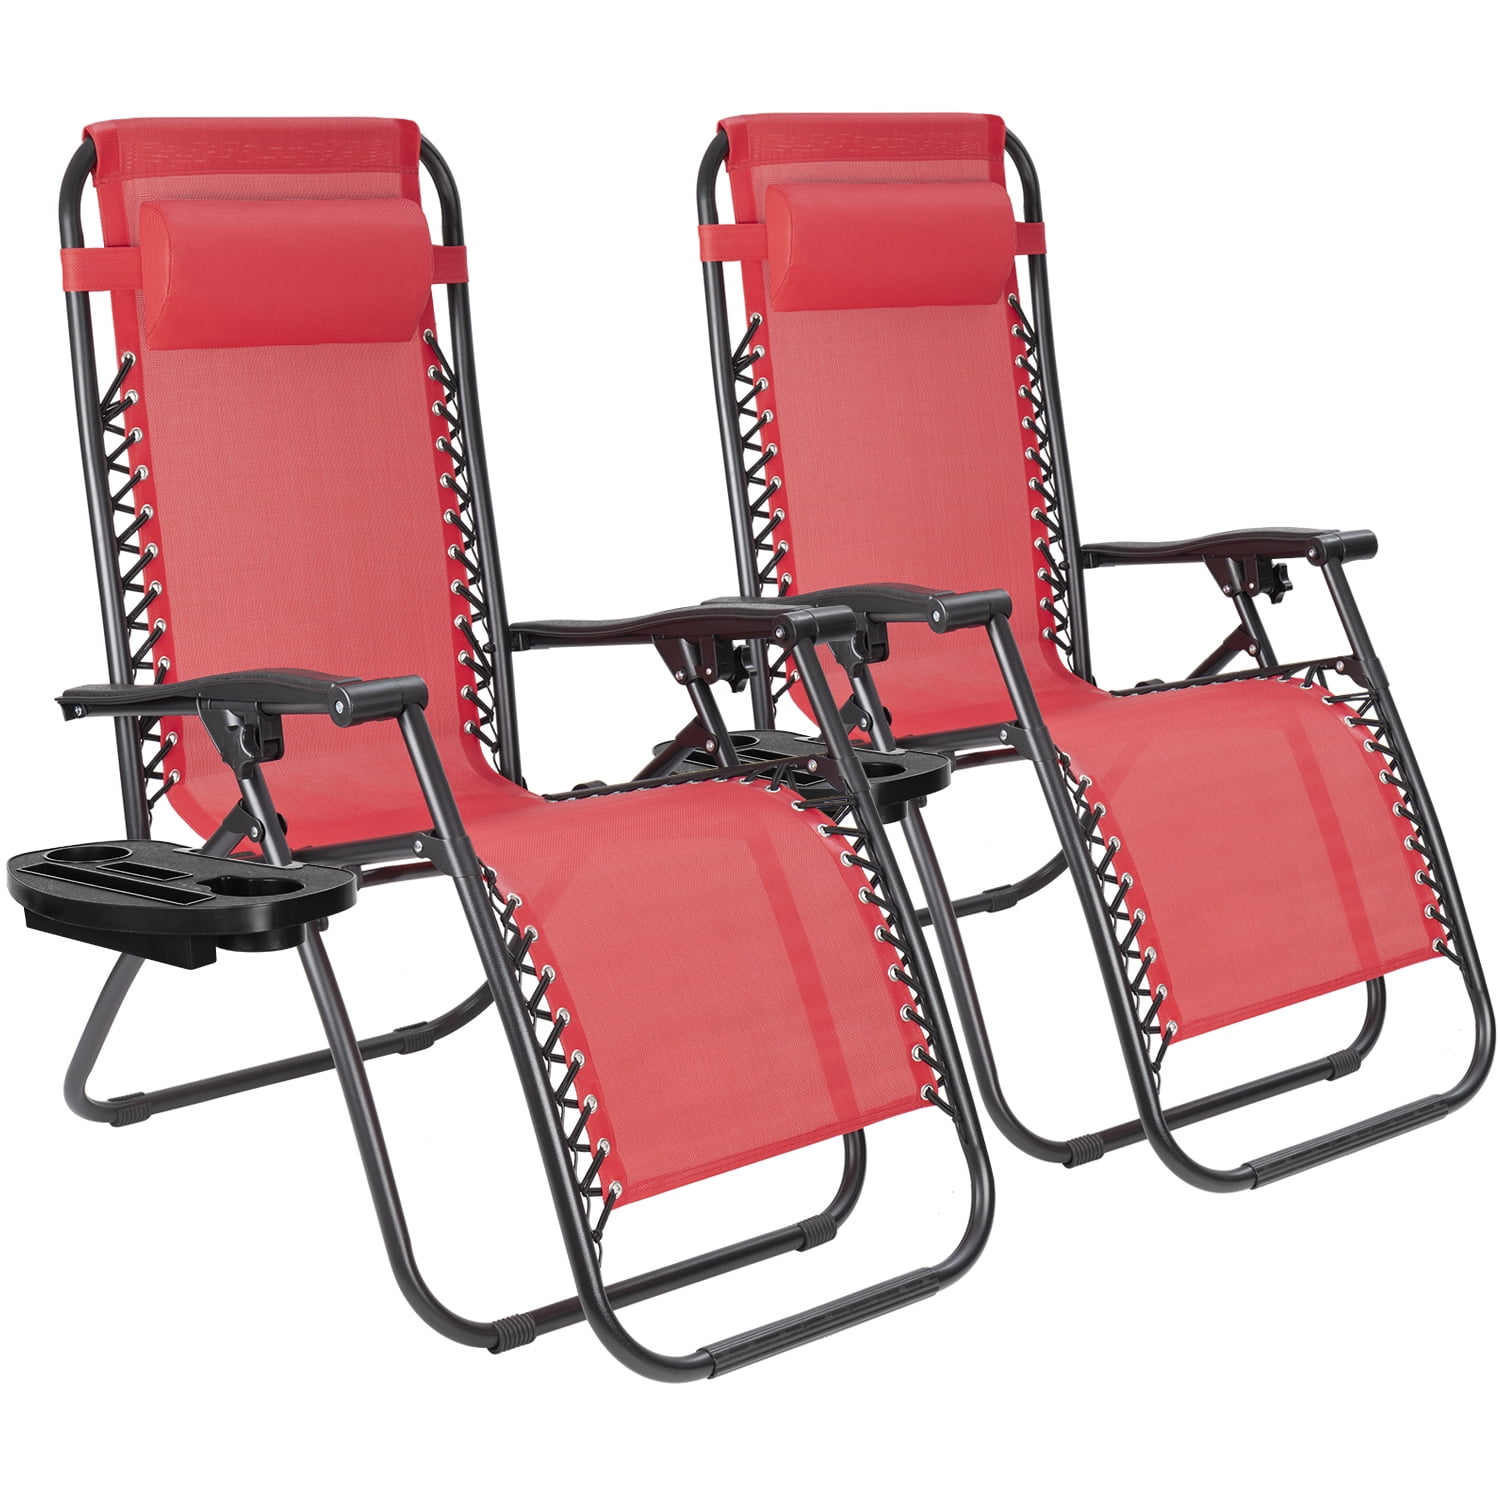 Walnew Zero Gravity Chair Camp, Red And Black Folding Patio Chairs